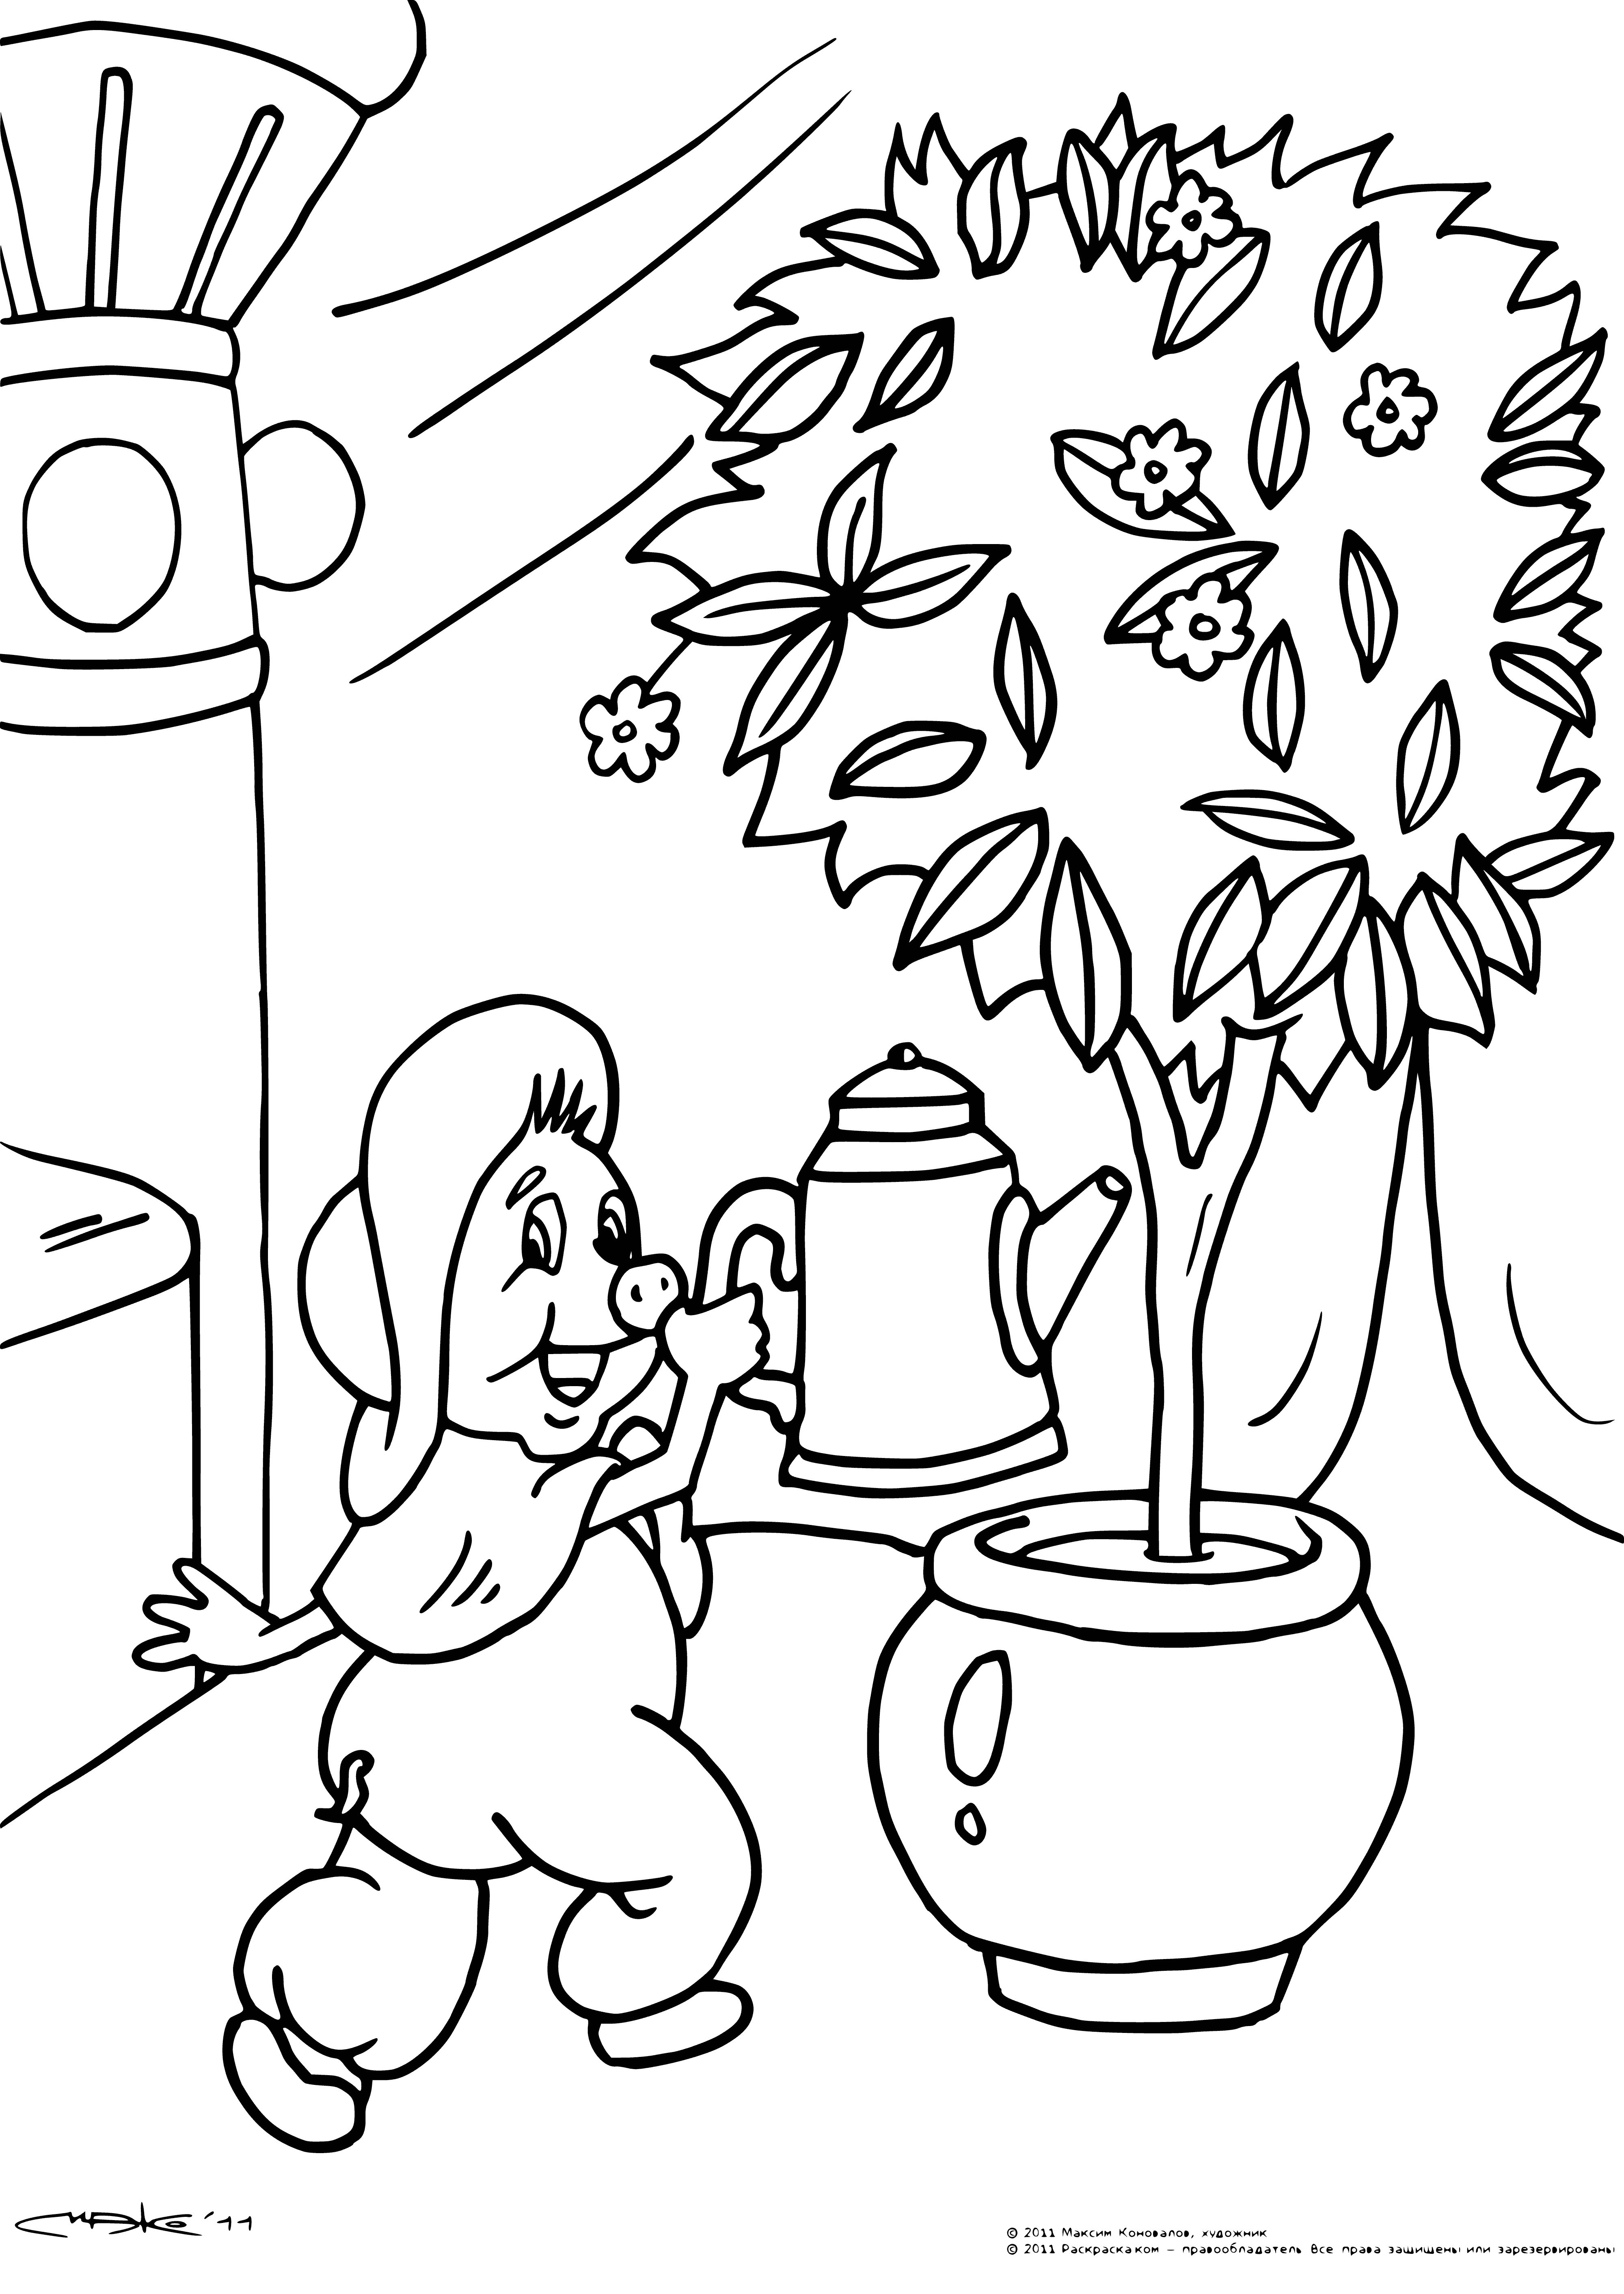 coloring page: Funtik, a grey kitten, is having magical adventures--a little bird flying around him as he waves his paw!